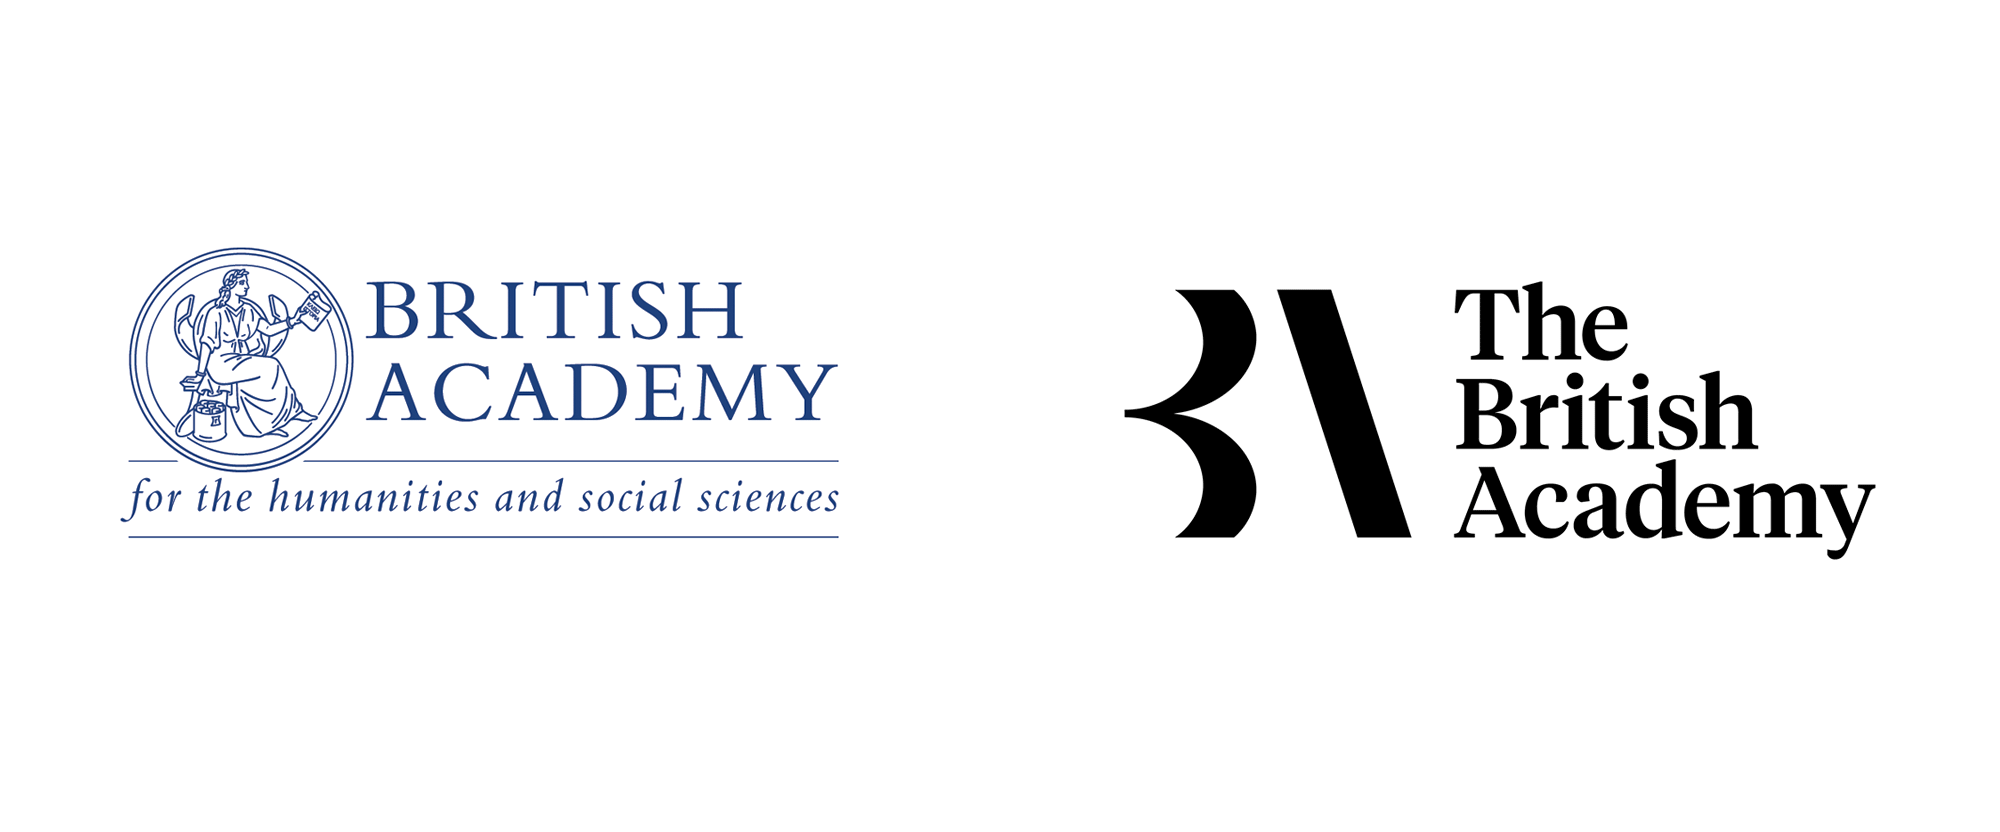 Academy Logo - Brand New: New Logo and Identity for The British Academy